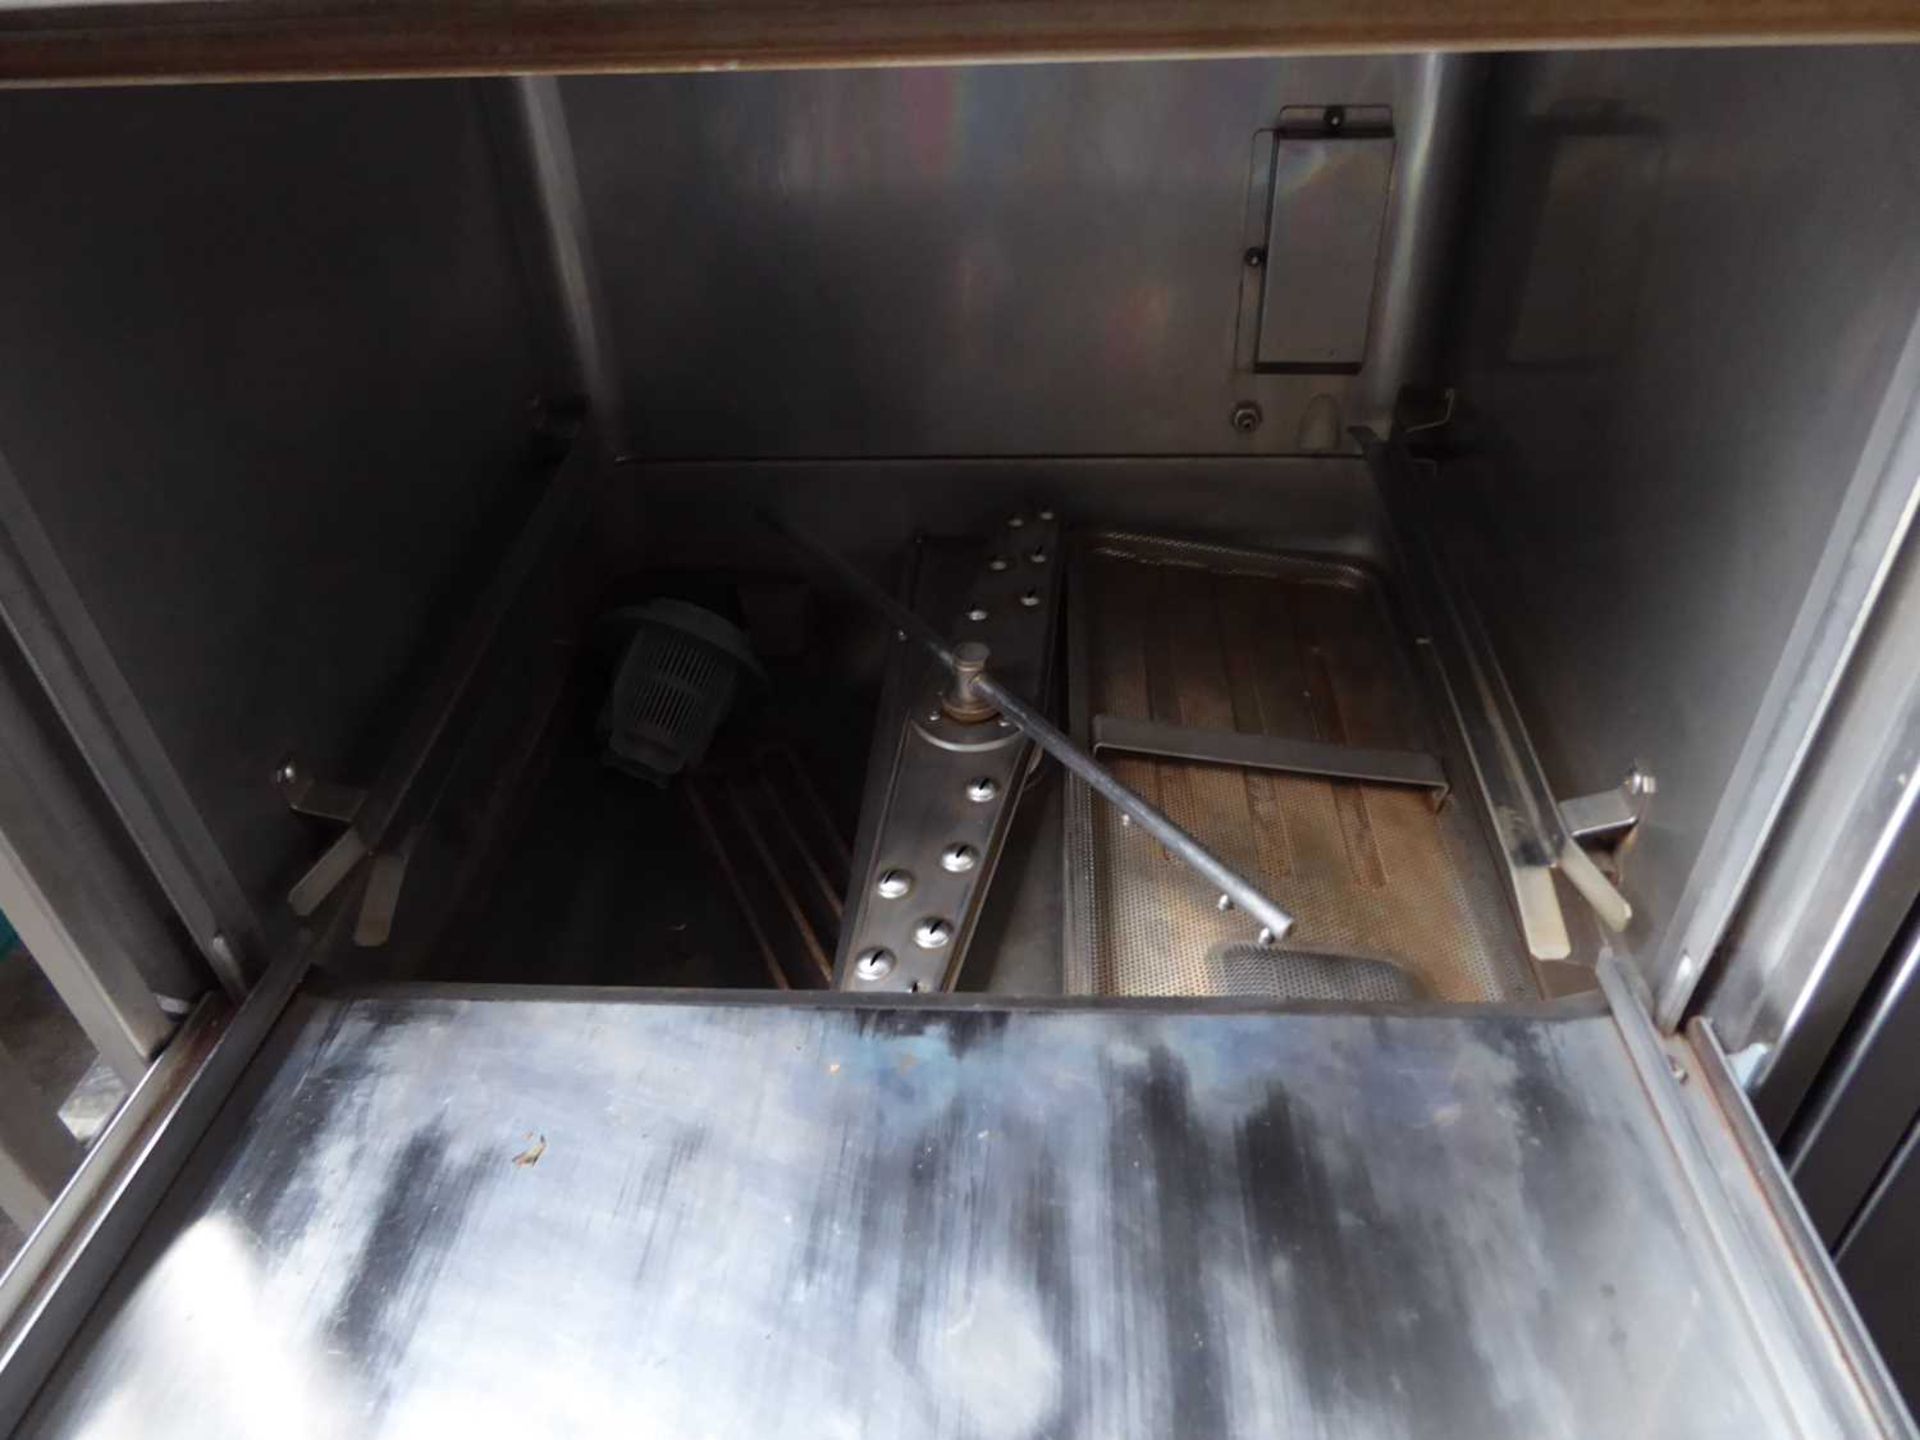 60cm Zanussi under counter drop front dishwasher - Image 2 of 2